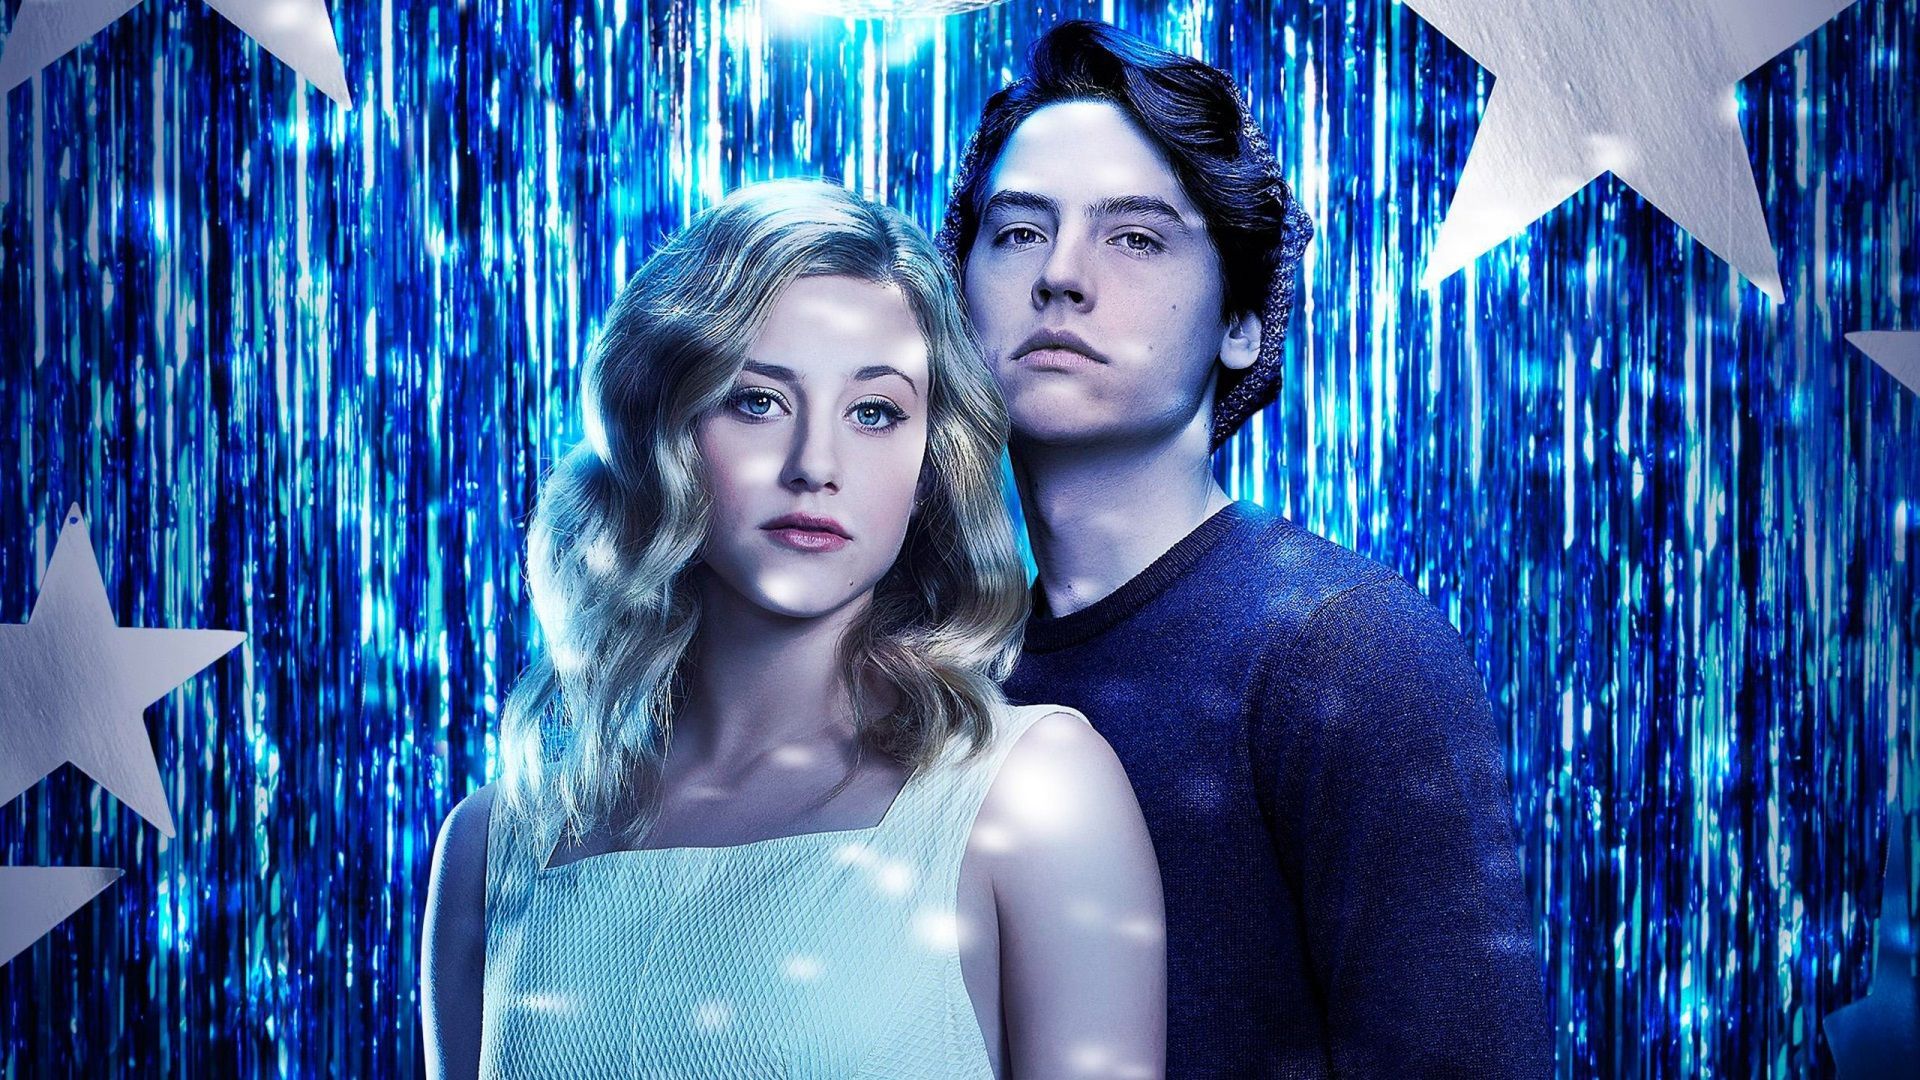 riverdale HD wallpaper picture. Cole sprouse, Riverdale